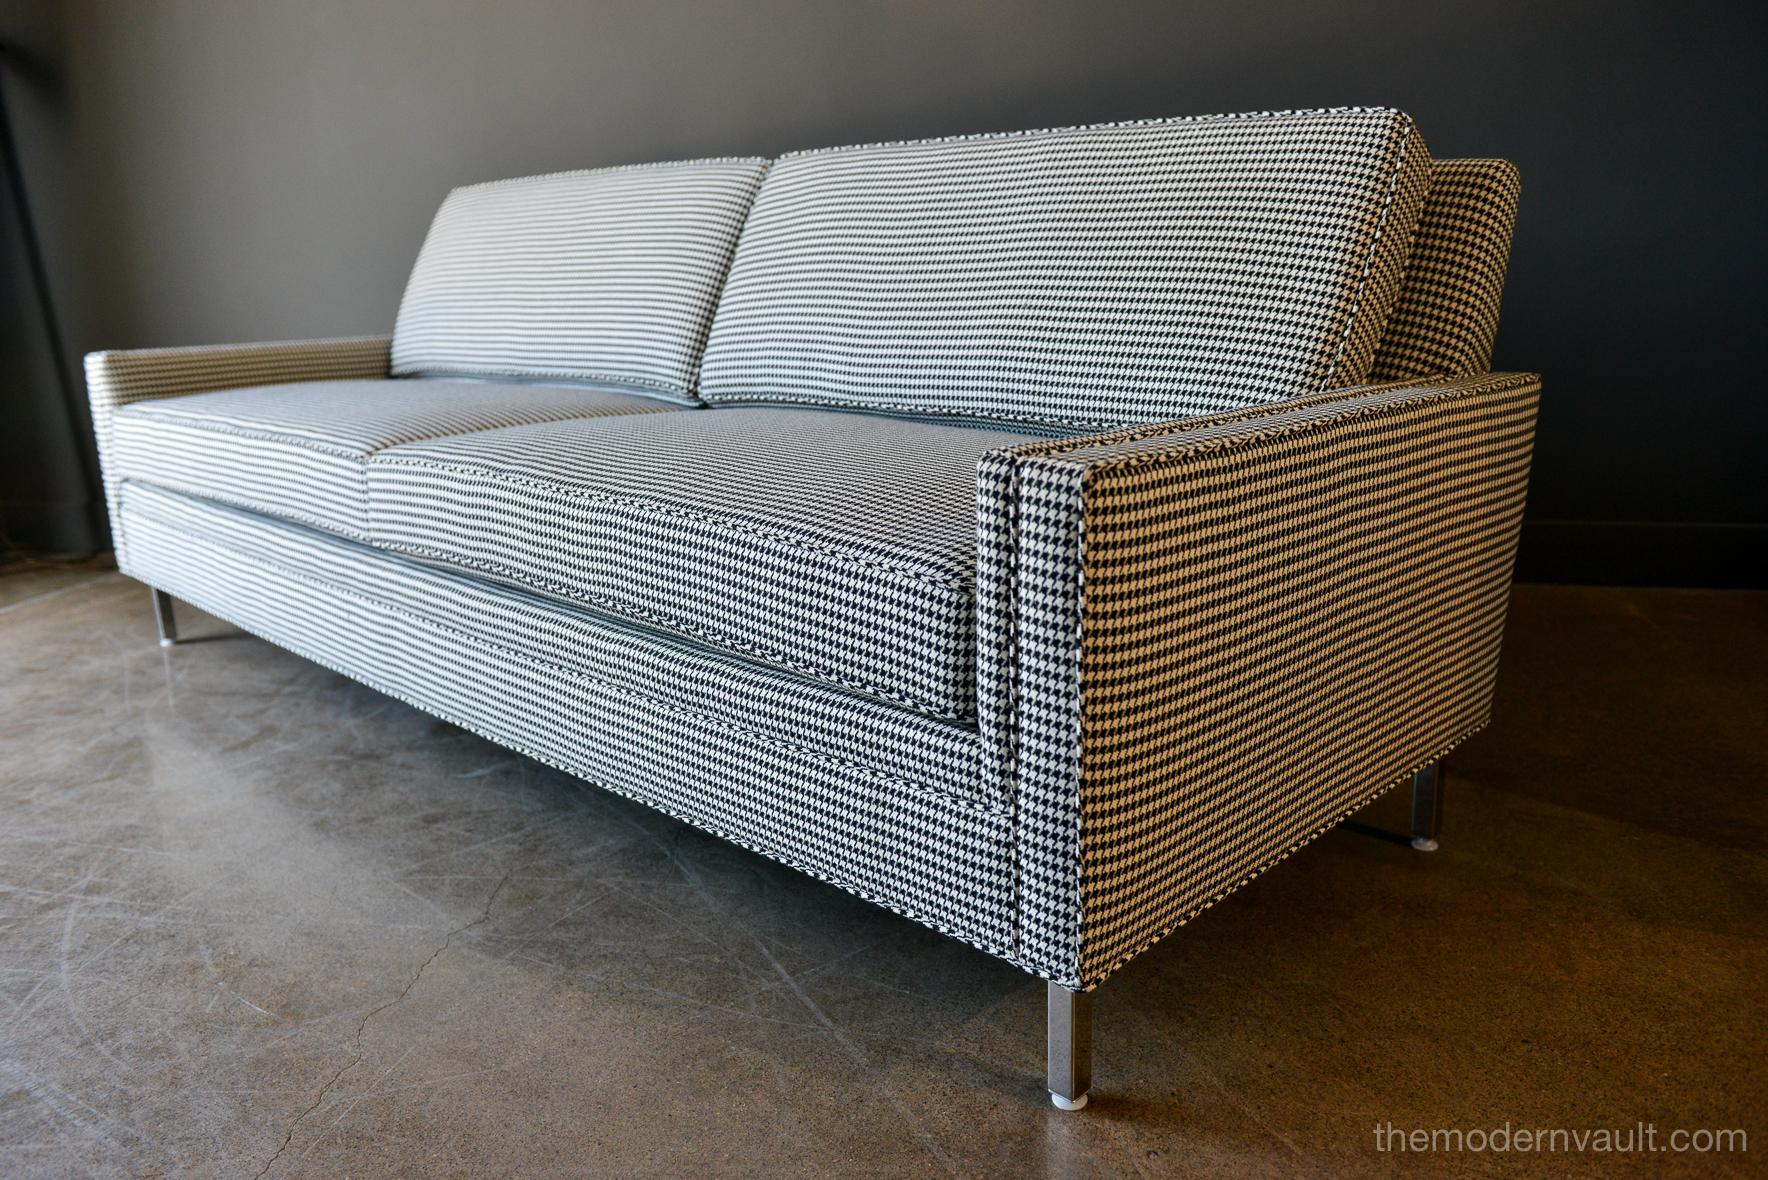 Mid-Century Modern sofa in black and white houndstooth, circa 1955. Professionally re-upholstered with new foam and fabric in beautiful black and white houndstooth fabric. Originally custom made for Richard Showrooms in Beverly Hills, circa 1950s.